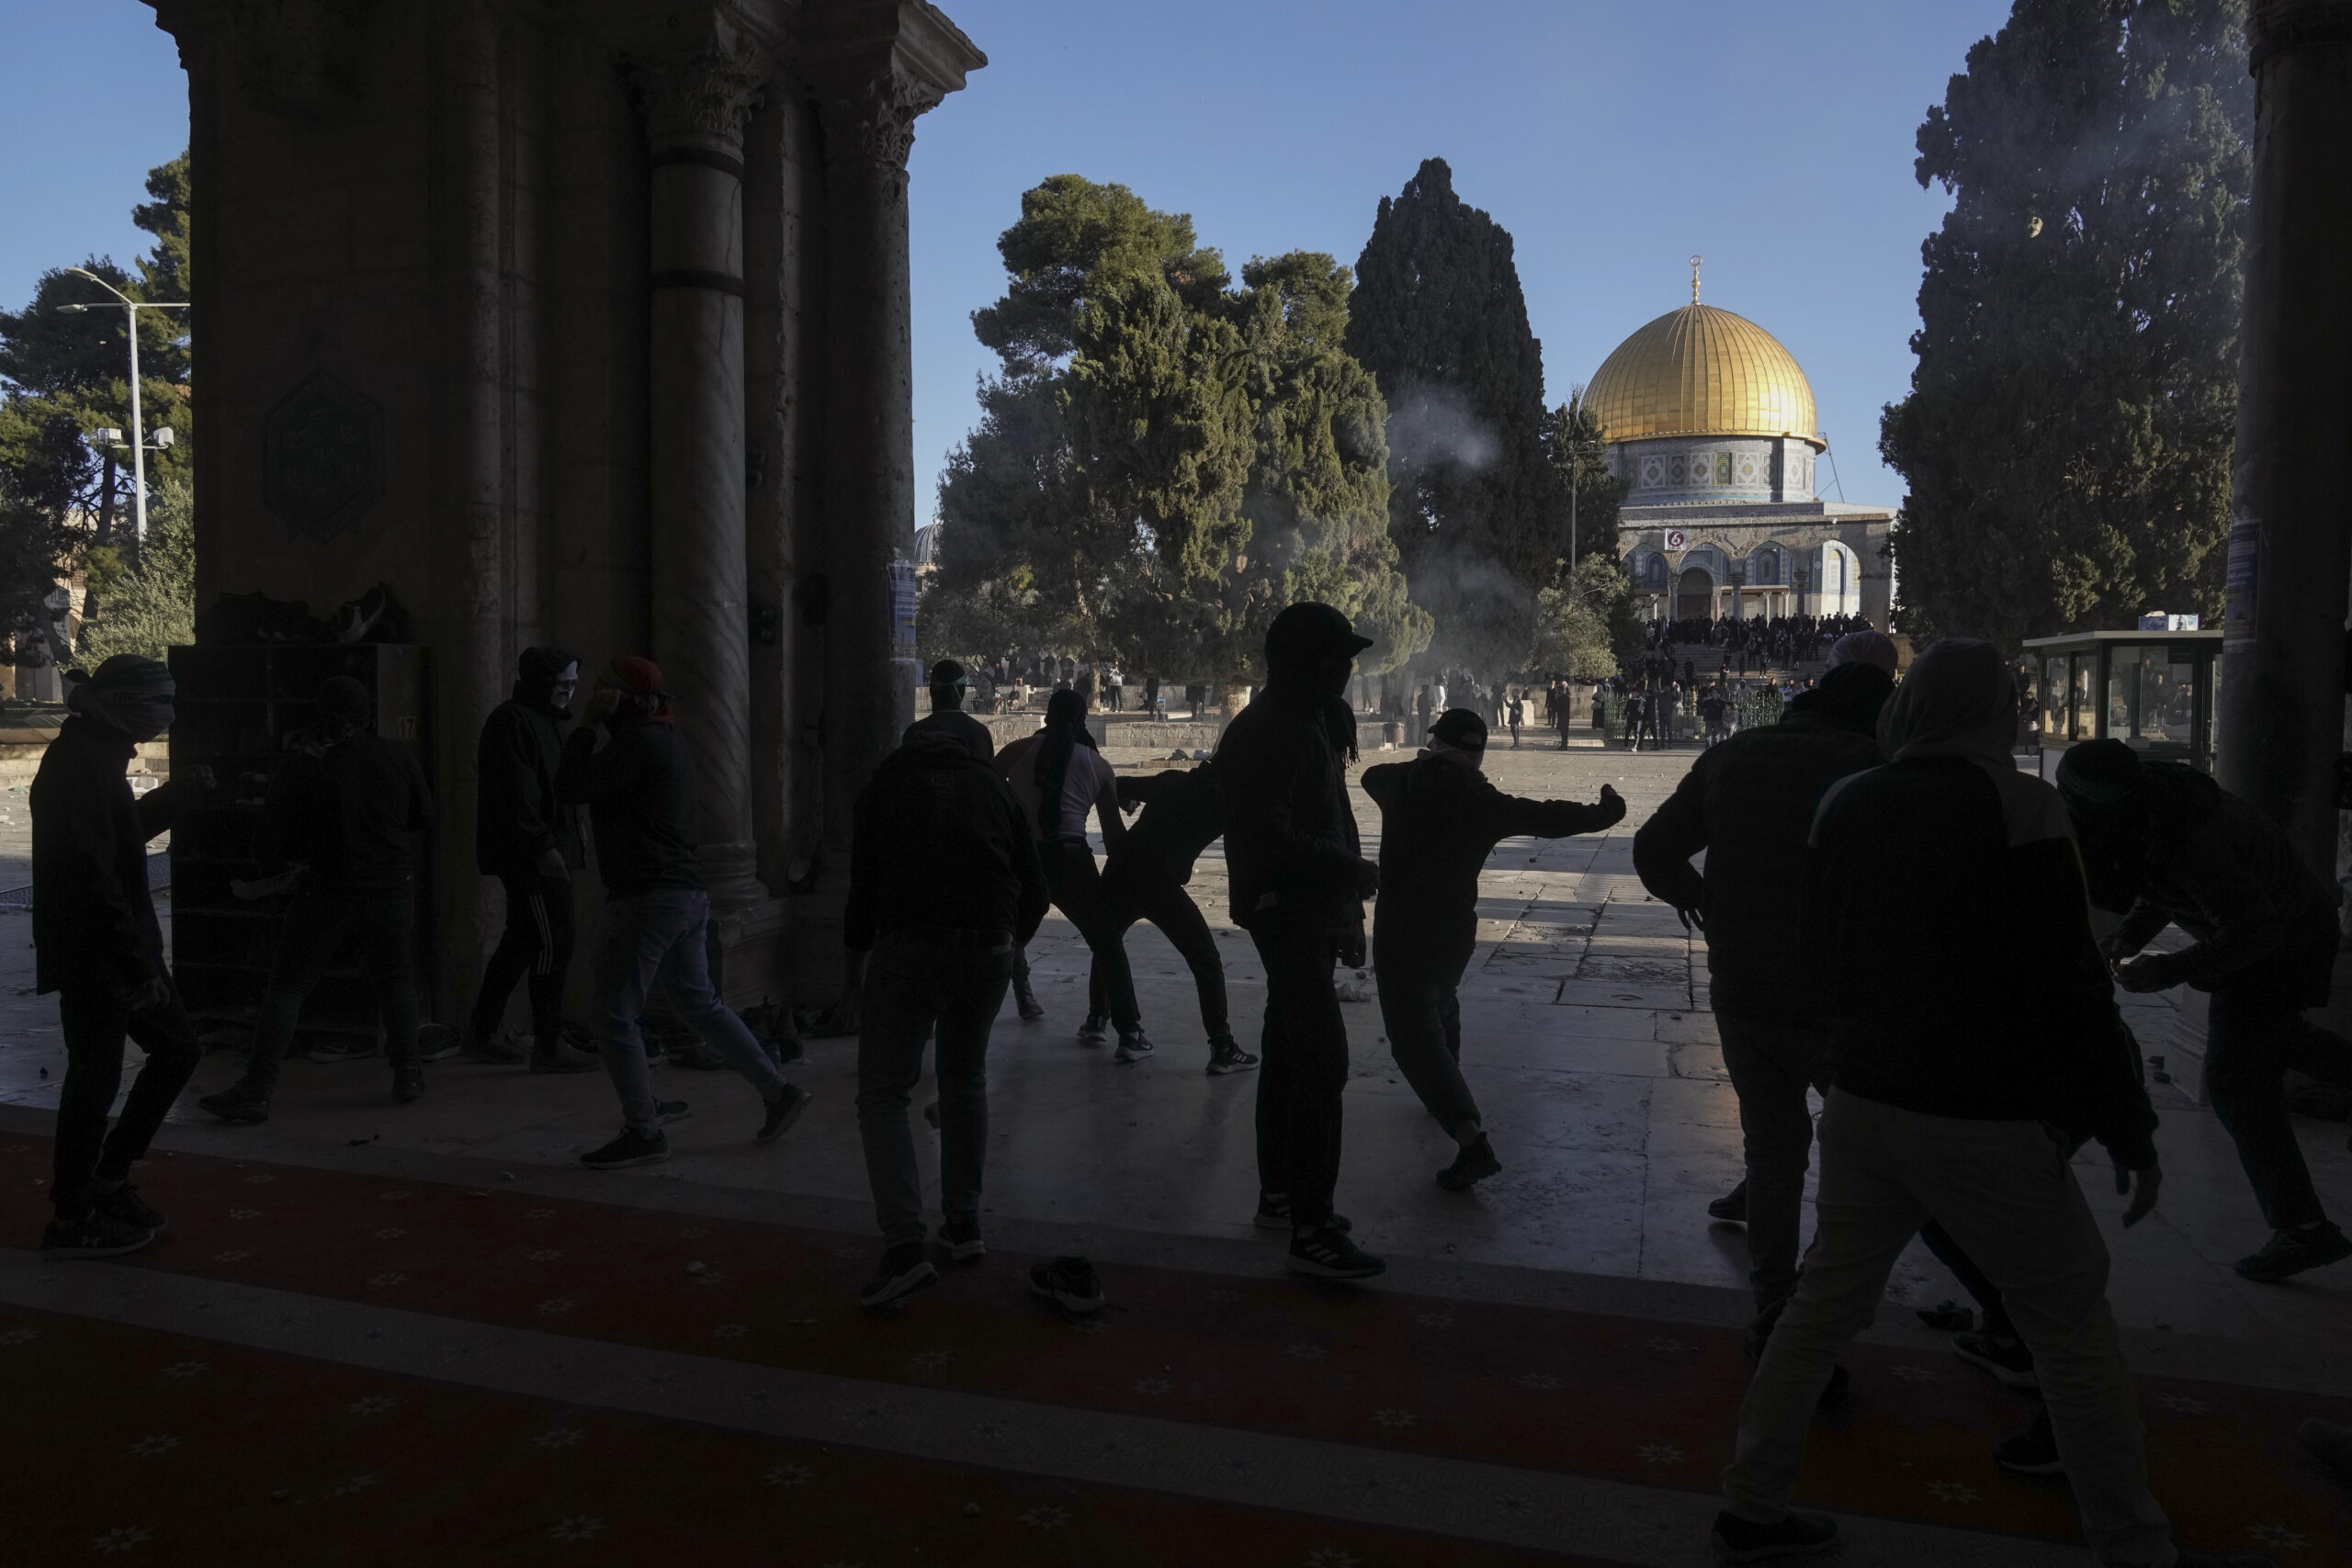 Palestinians clash with Israeli security forces at the Al Aqsa Mosque compound in Jerusalem's Old City Friday, April 15, 2022. (AP Photo/Mahmoud Illean)